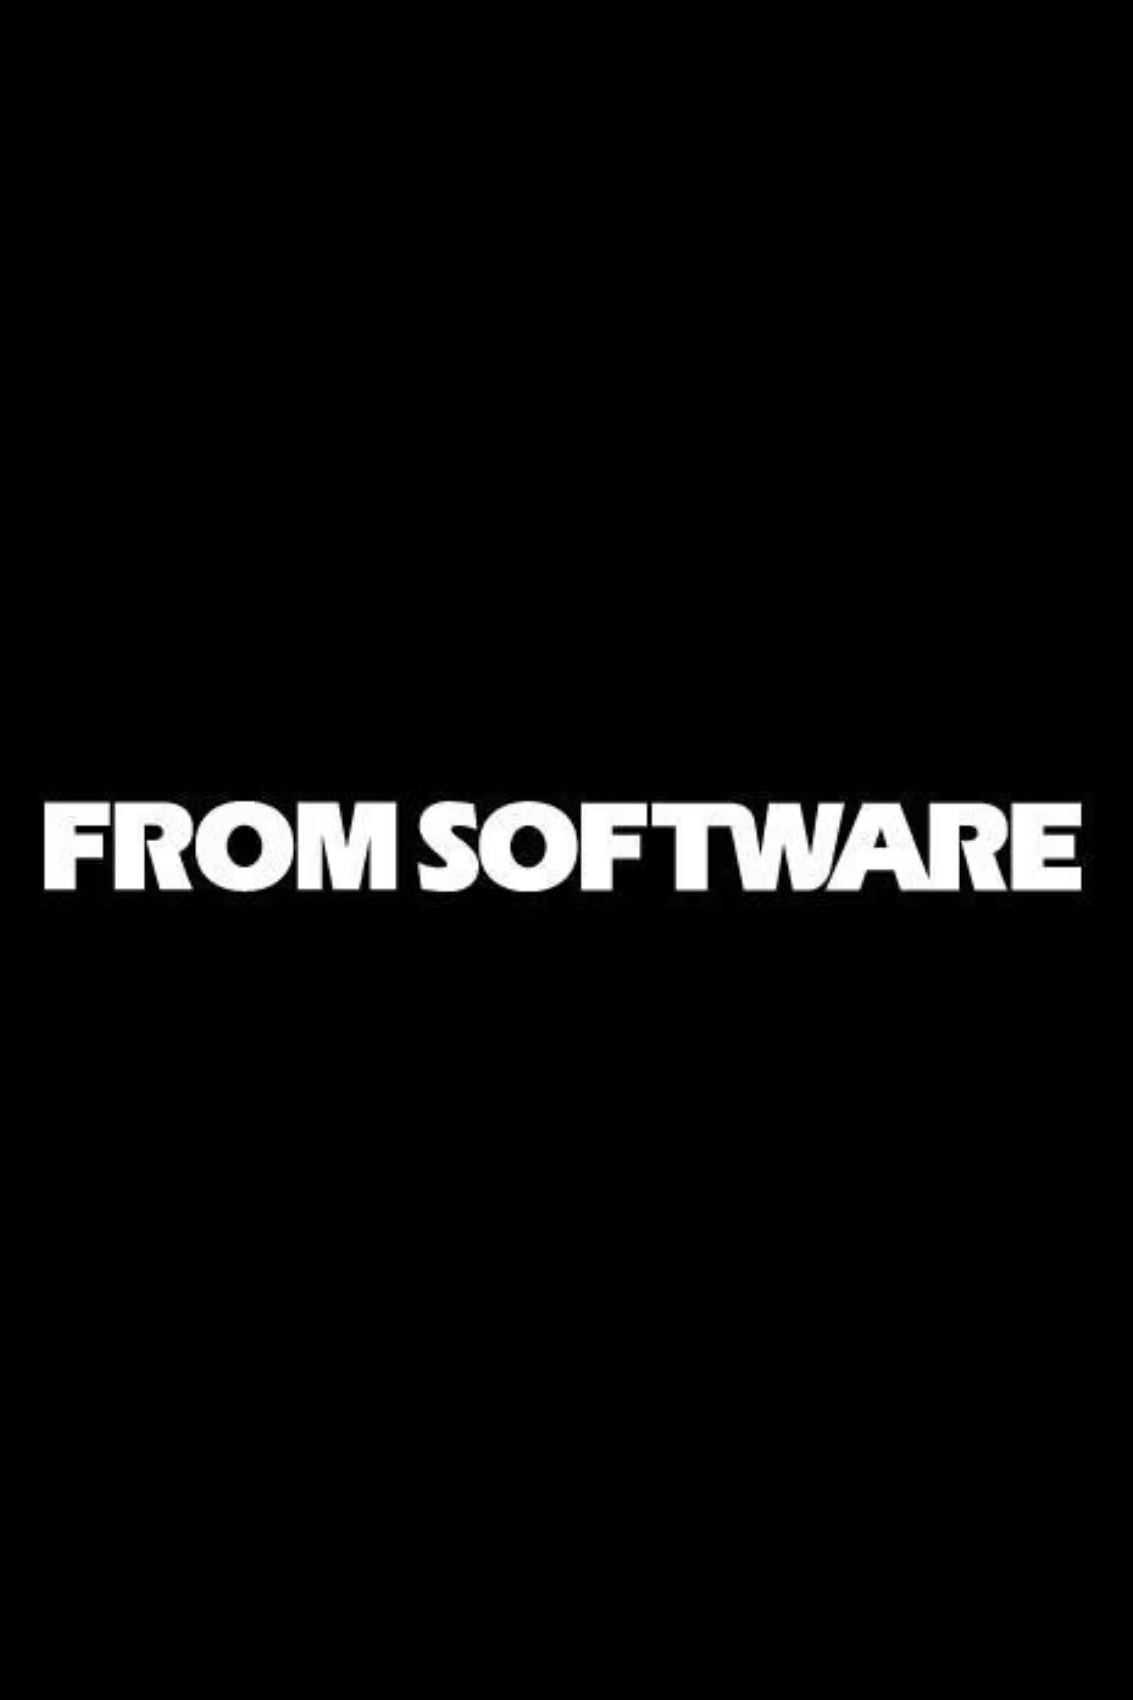 FromSoftware Company Logo Poster